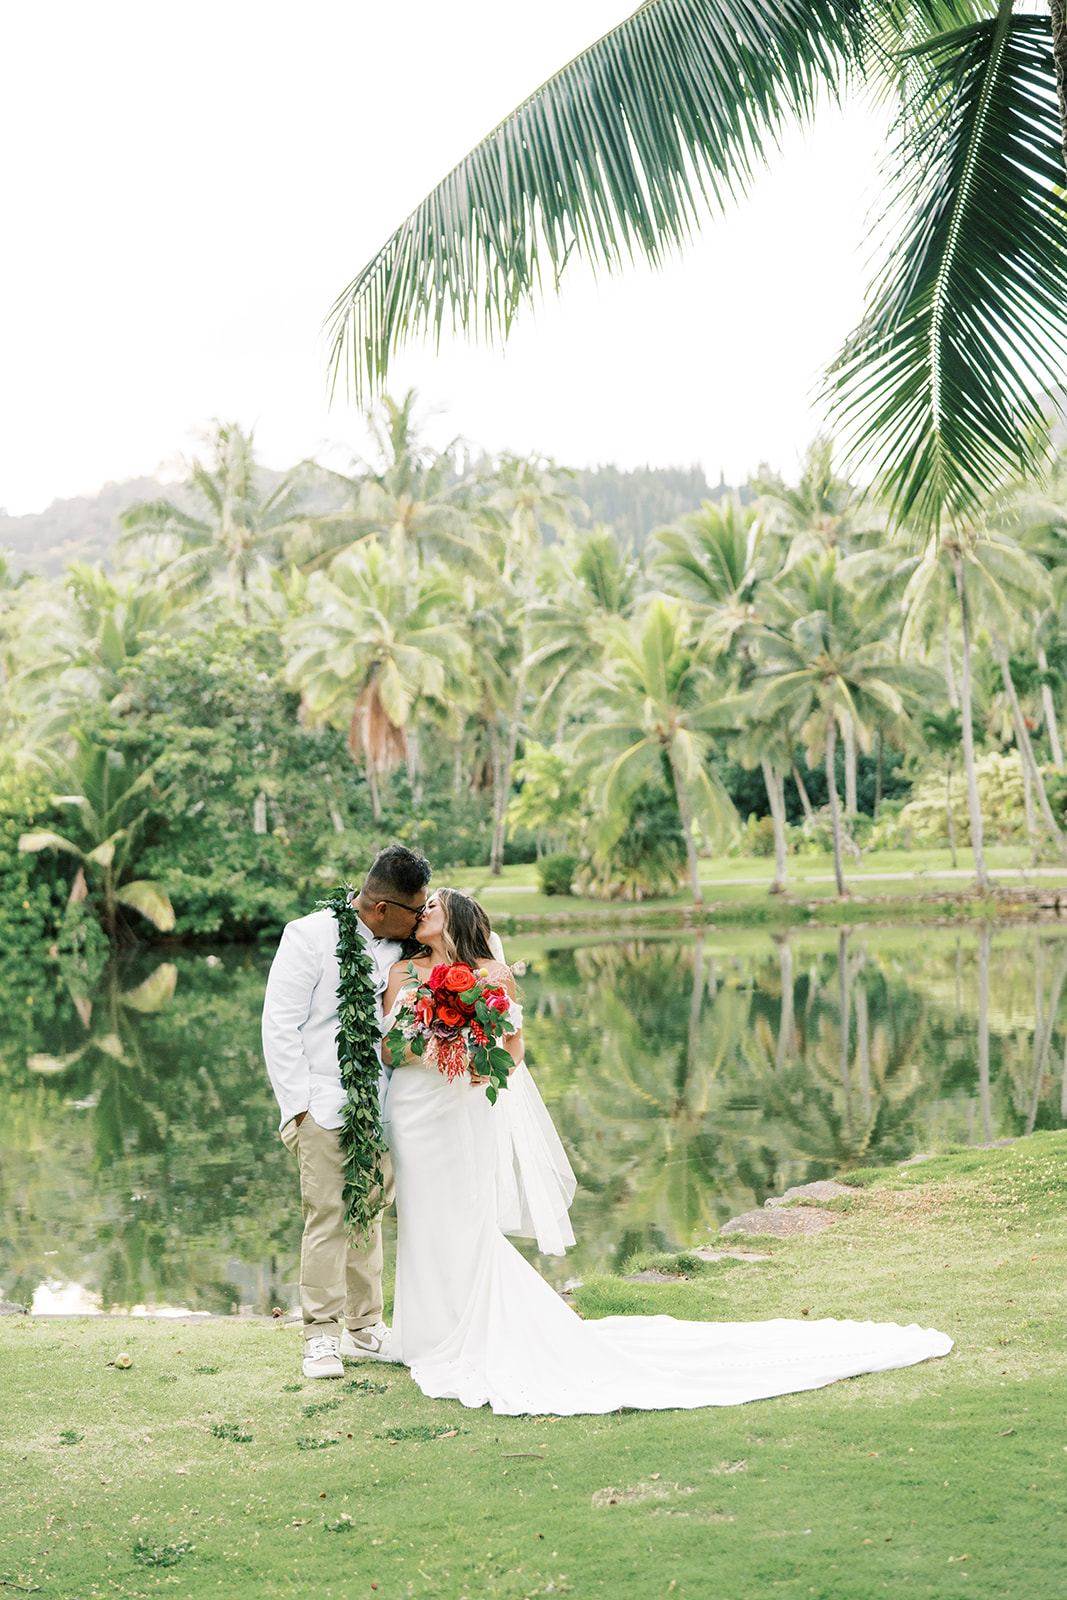 A couple in wedding attire sharing an intimate moment by a pond surrounded by lush greenery taken by Megan Moura Wedding